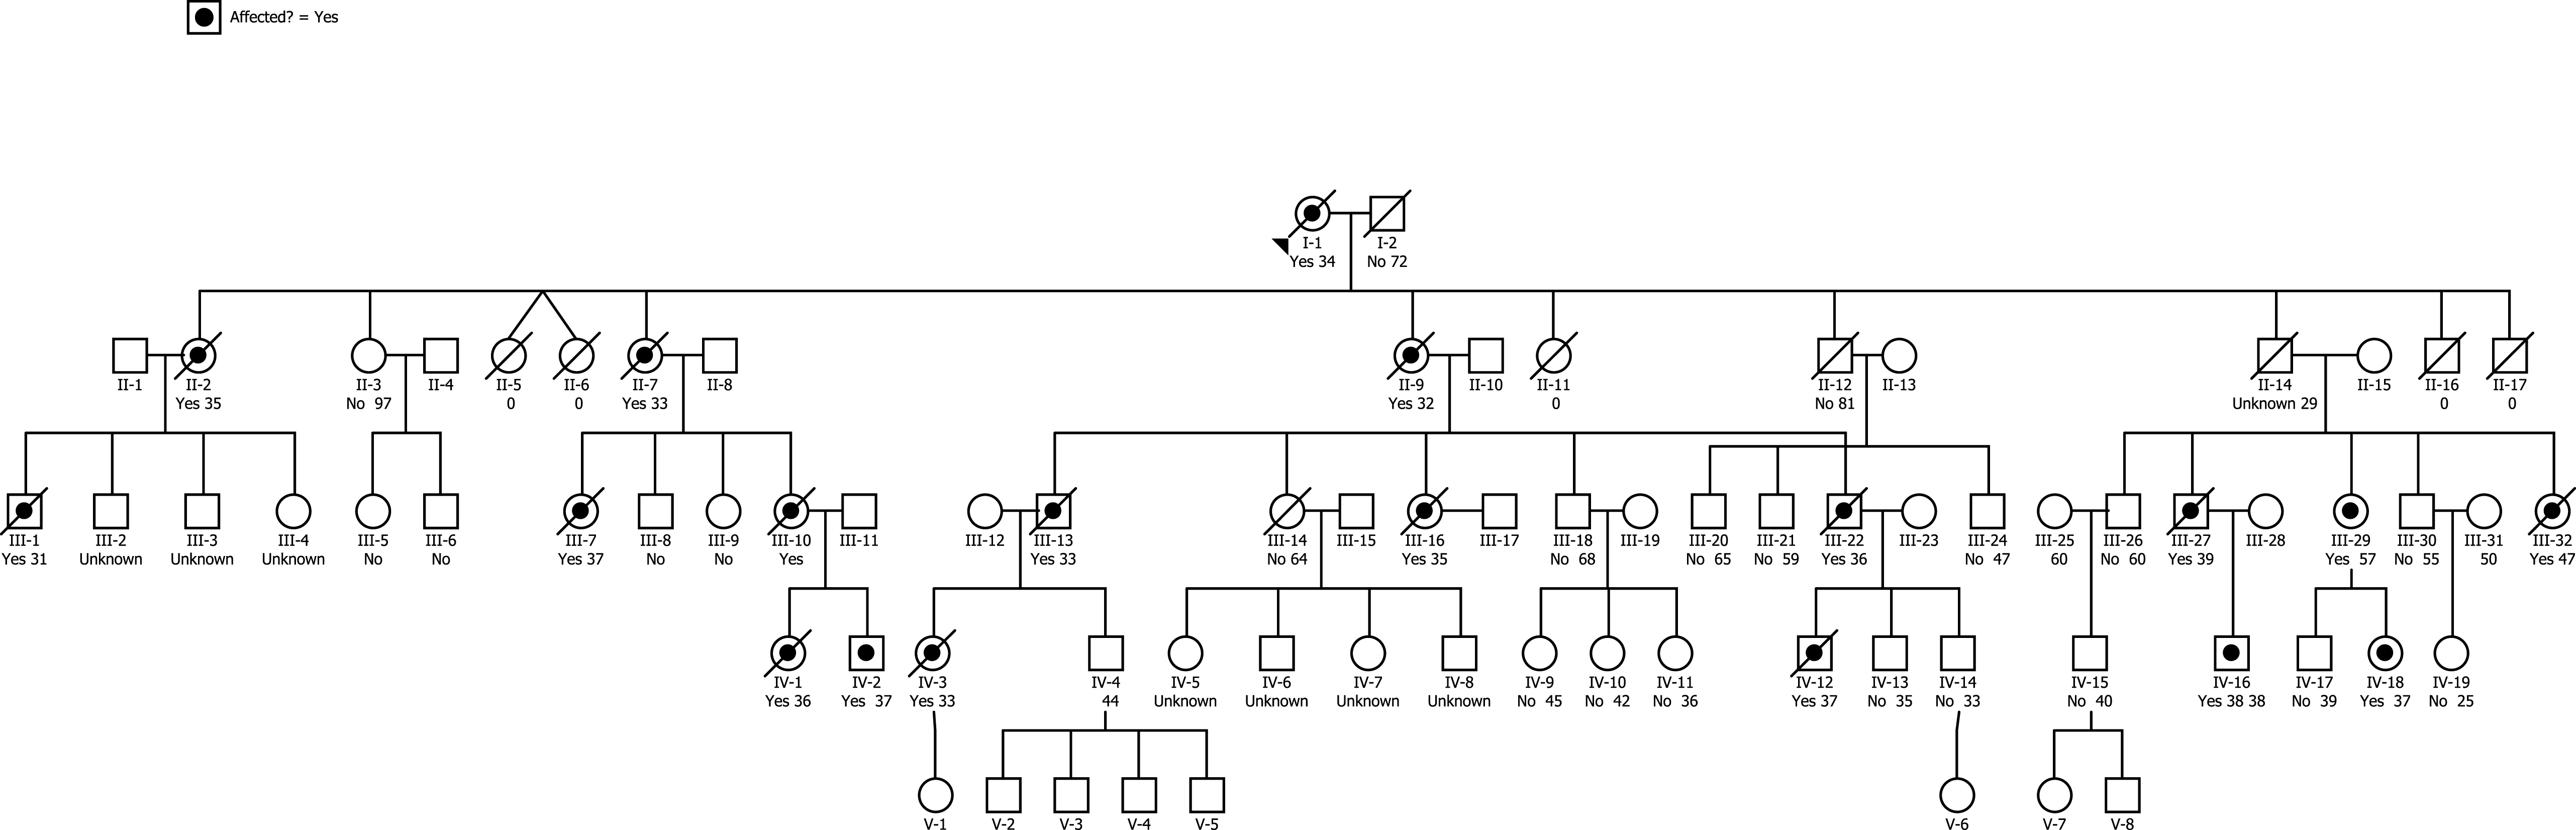 Pedigree of early-onset dementia family. Bulleted symbols represent patients with early-onset dementia. Open symbols represent patients with either clinically normal or unknown phenotype. For deceased patients, age at the time of death is given. For living patients, age at time of the pedigree construction is shown.